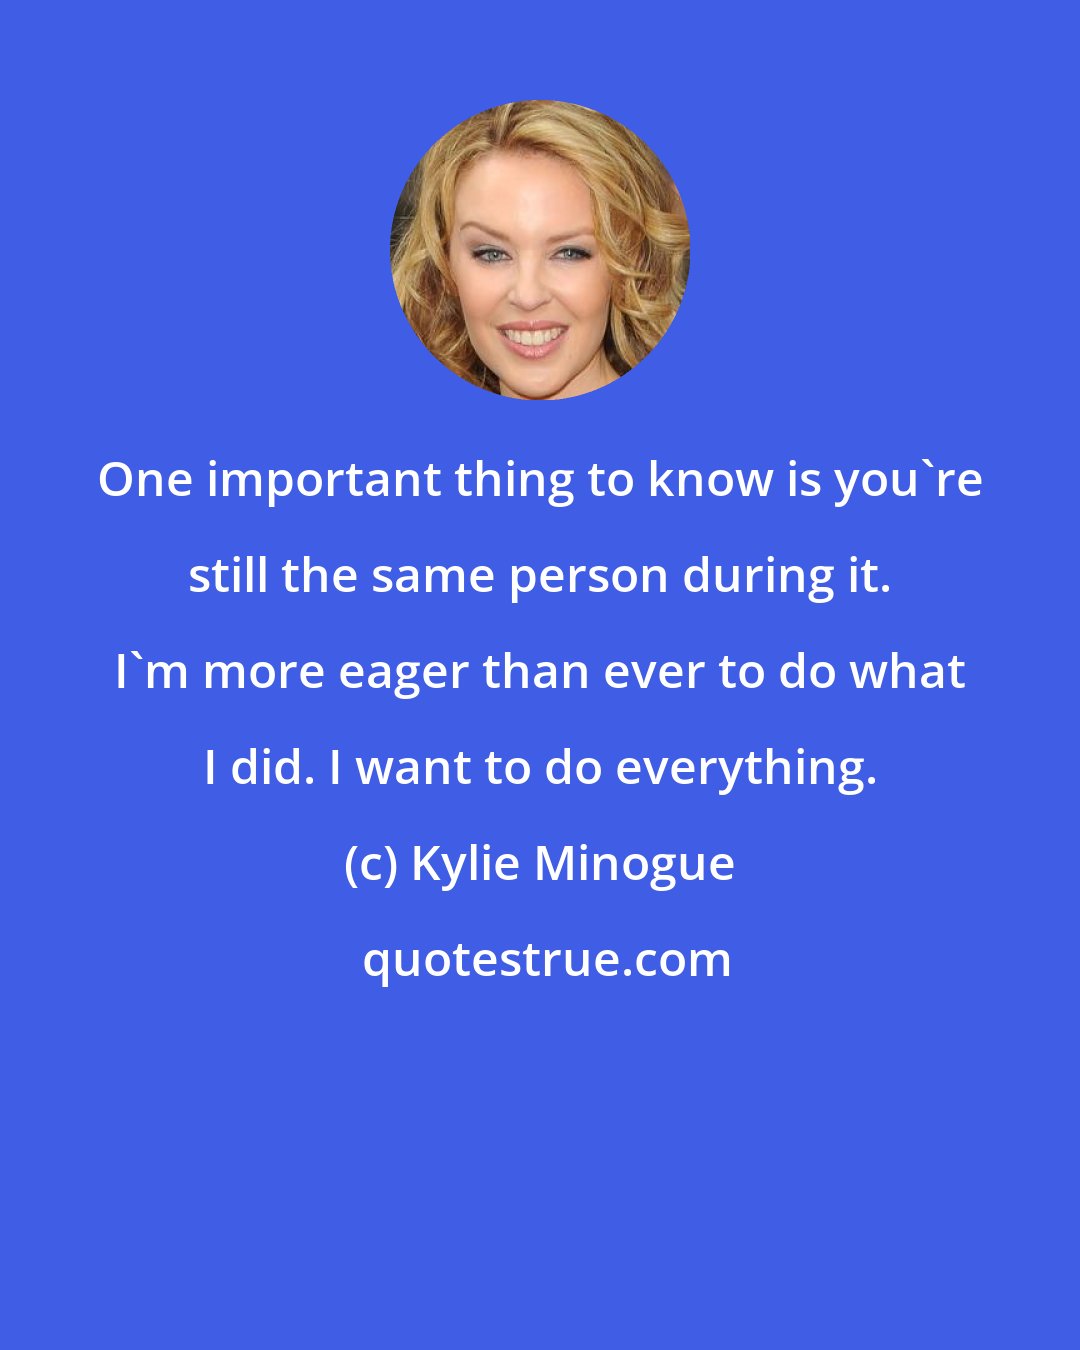 Kylie Minogue: One important thing to know is you're still the same person during it. I'm more eager than ever to do what I did. I want to do everything.